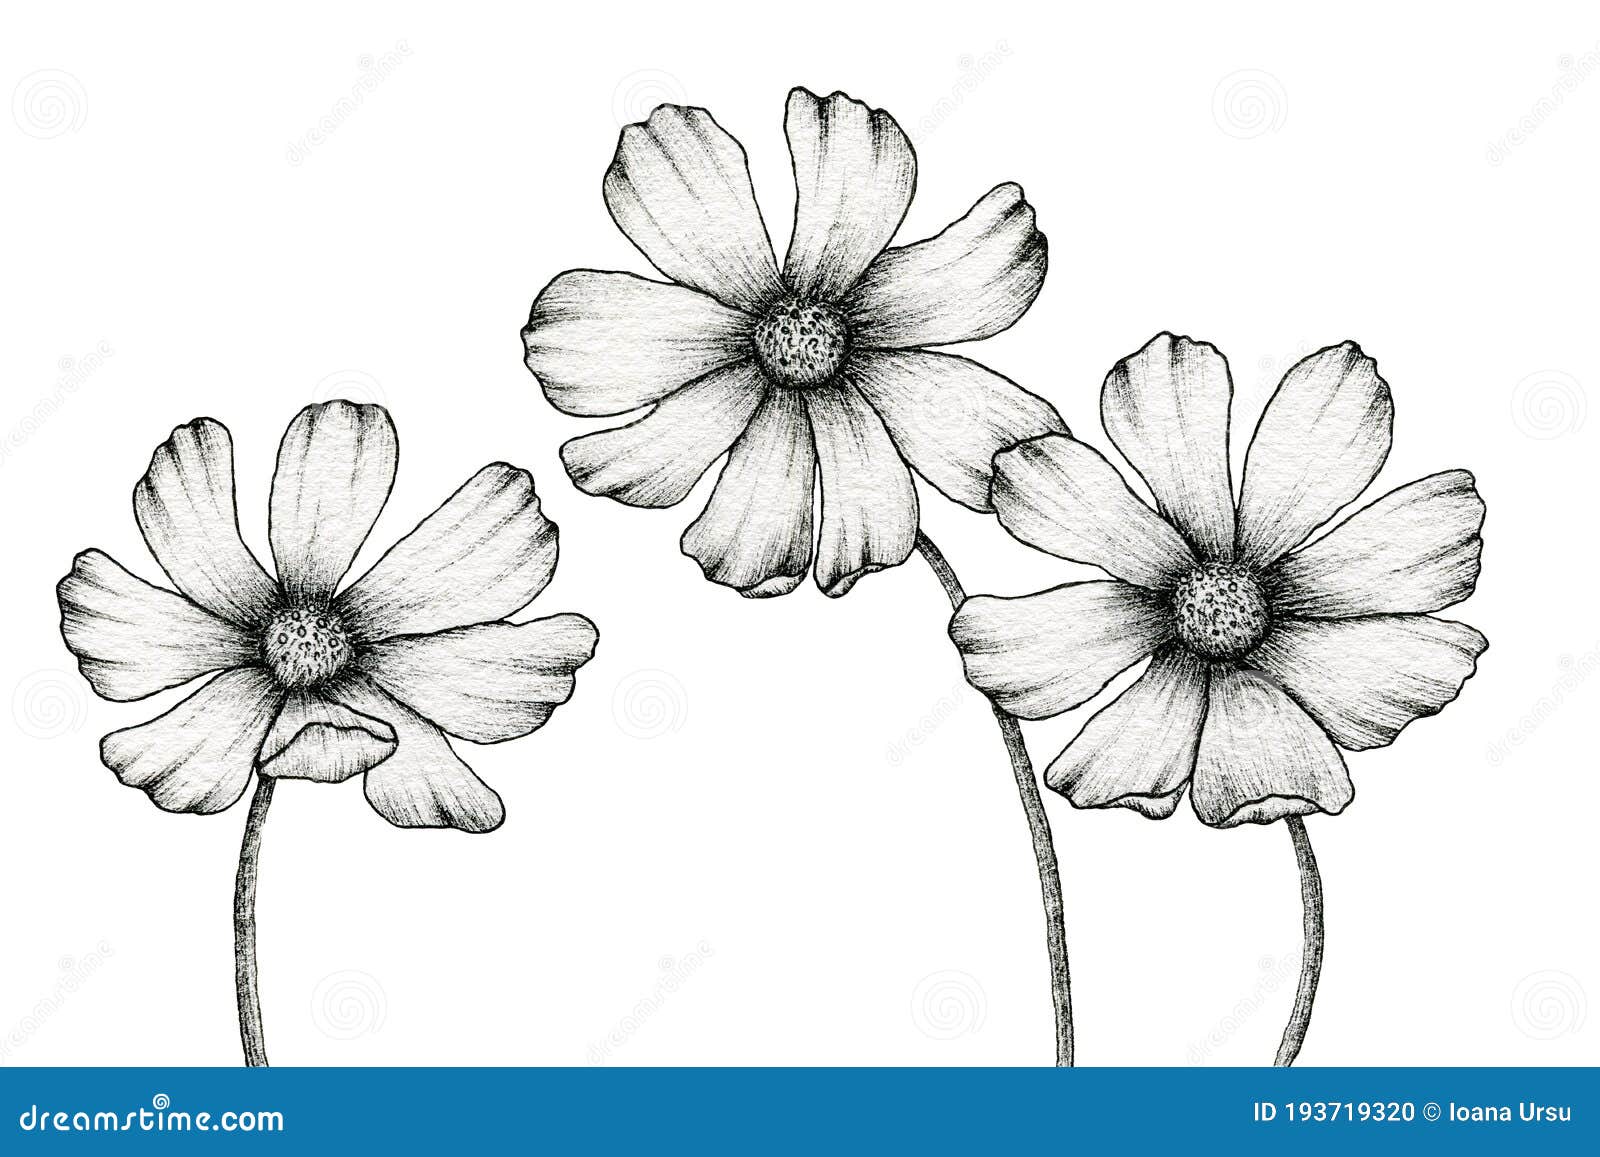 Monochrome Cosmos Flowers Drawing Isolated on White, Floral Ink ...